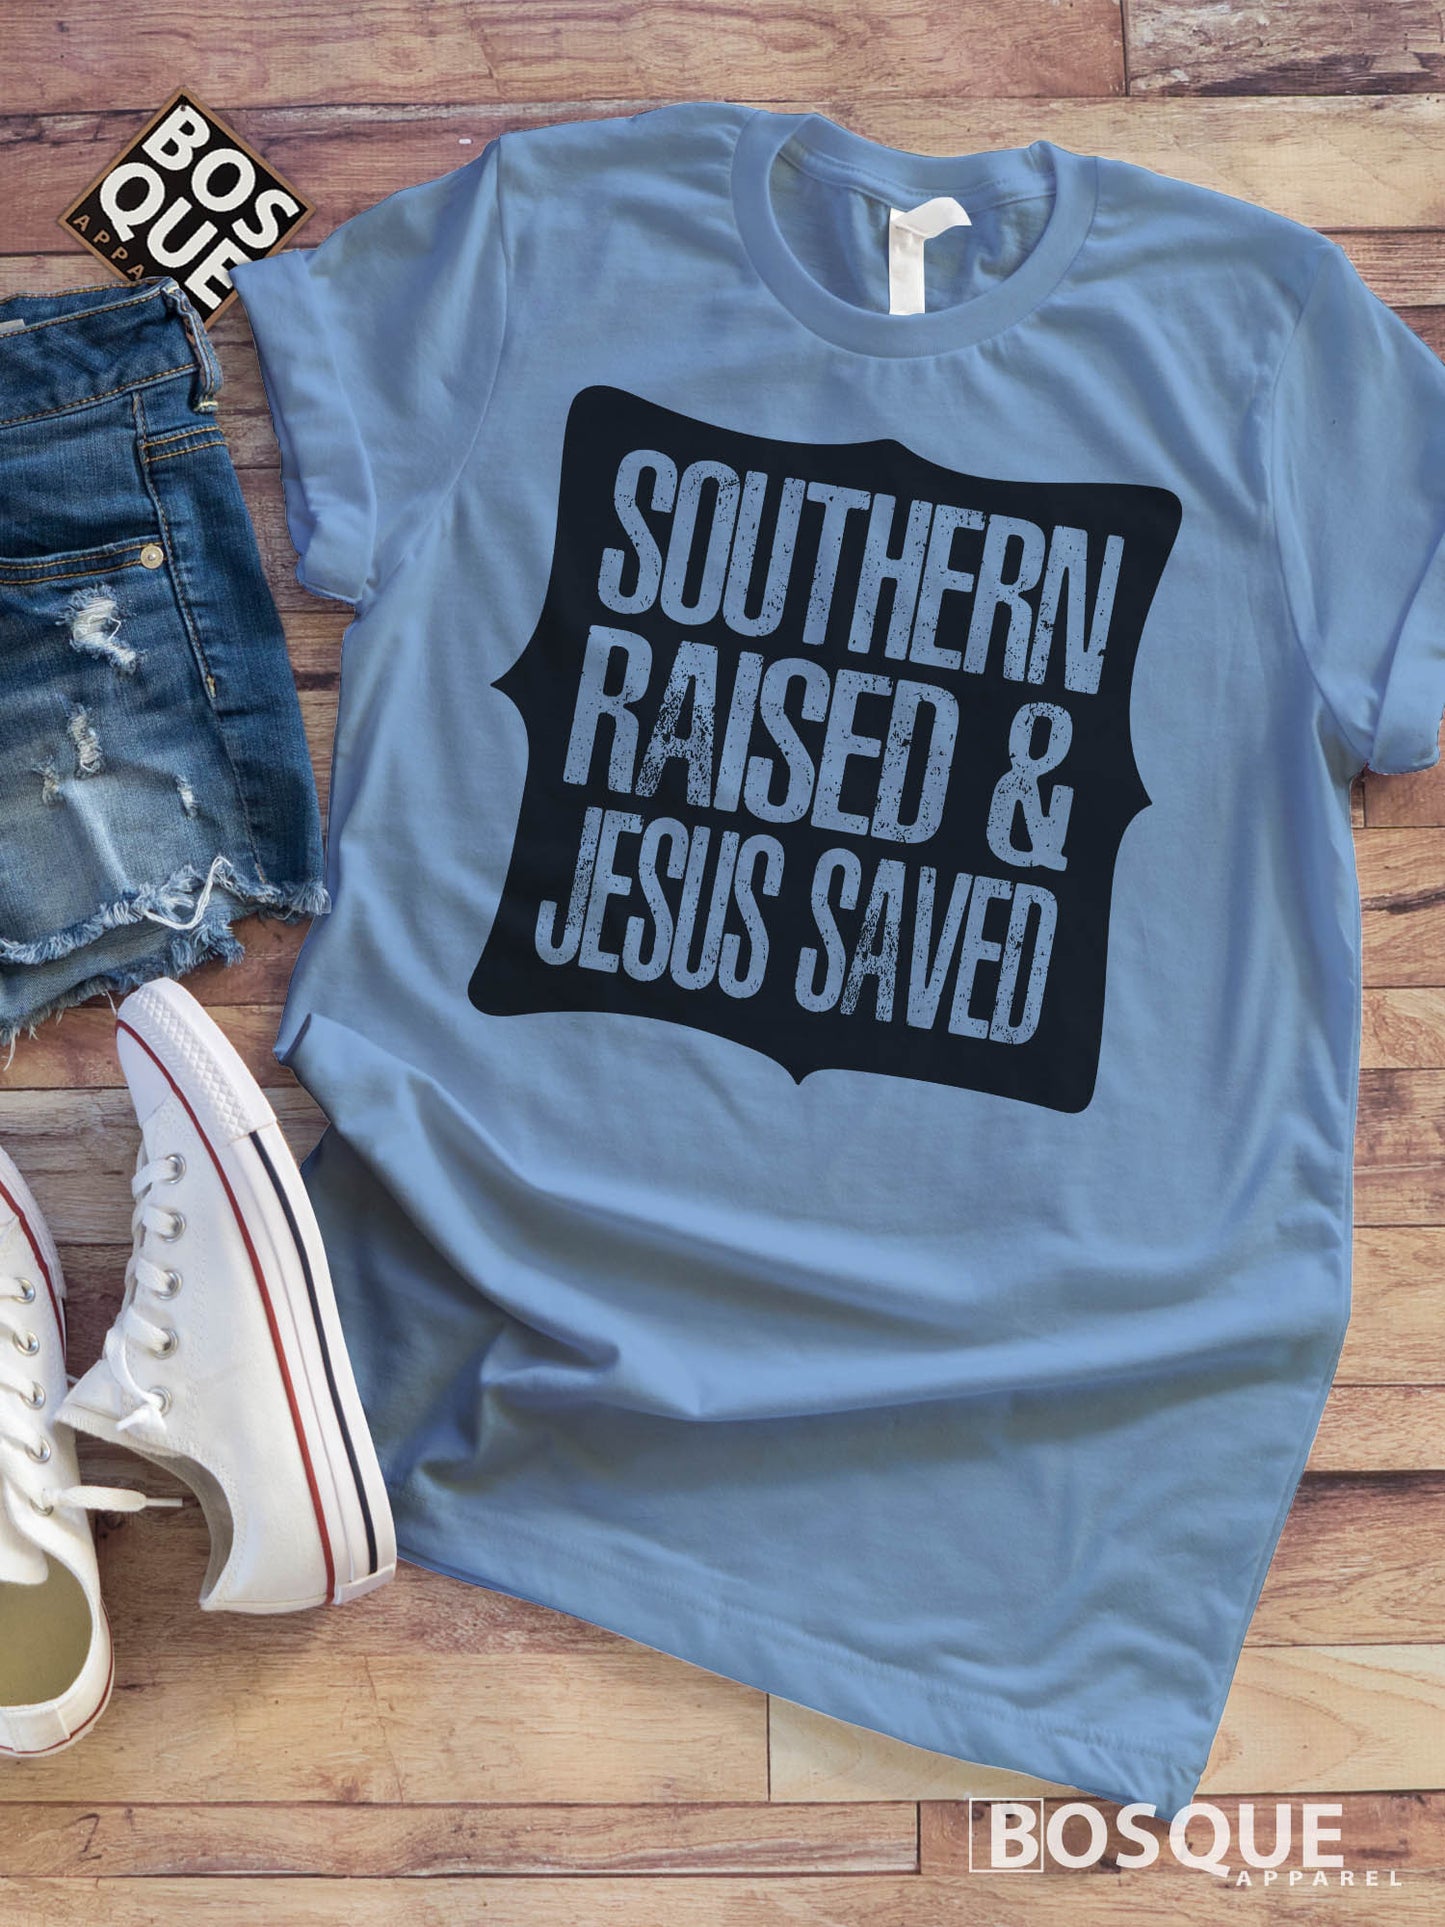 Southern Raised & Jesus Saved Country Unisex t-shirt